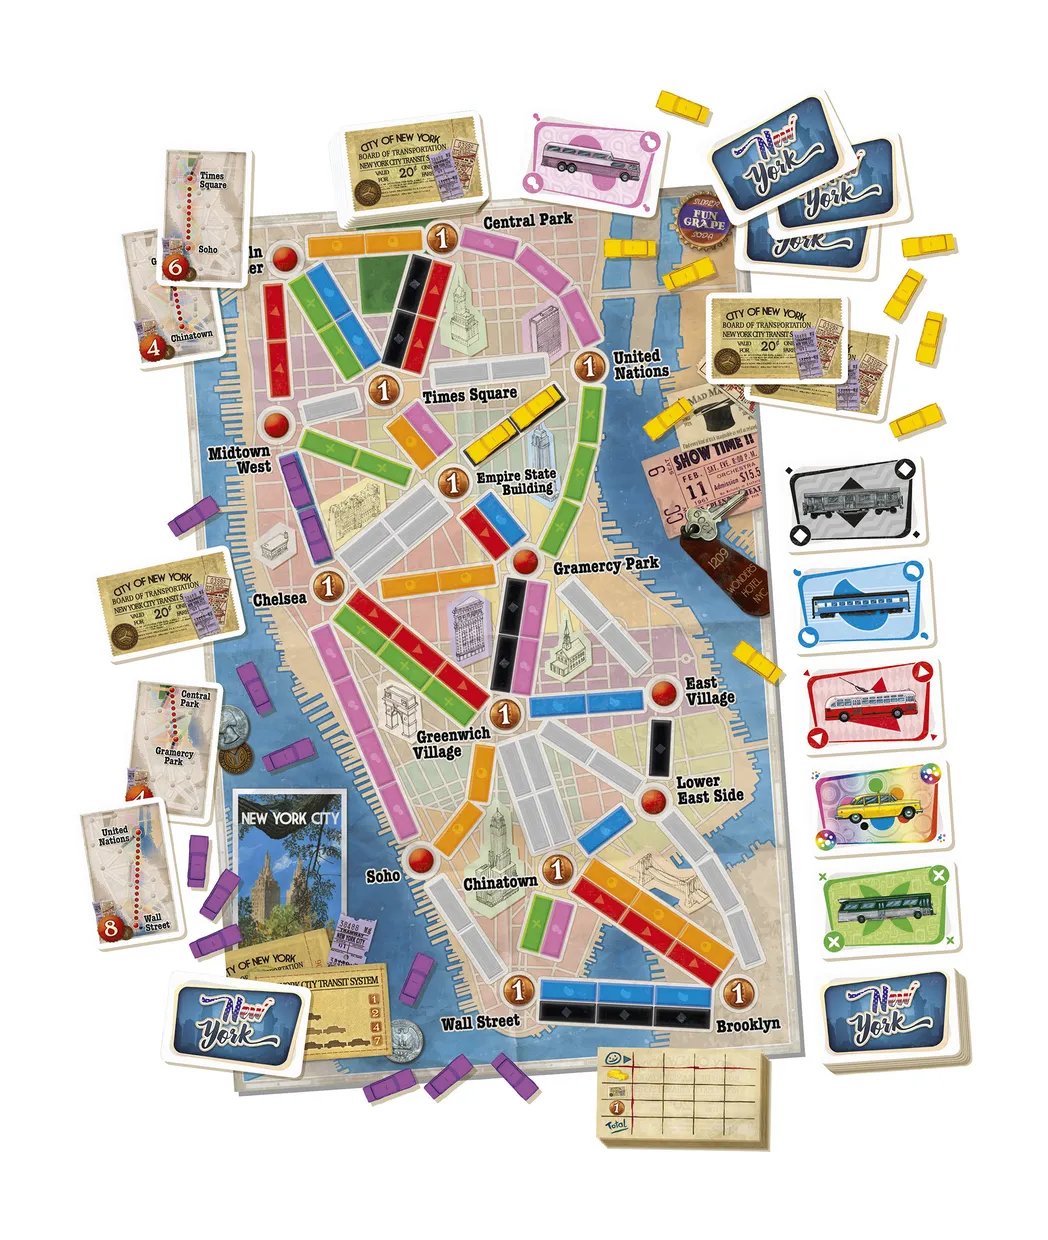 Ticket to Ride New York - NL